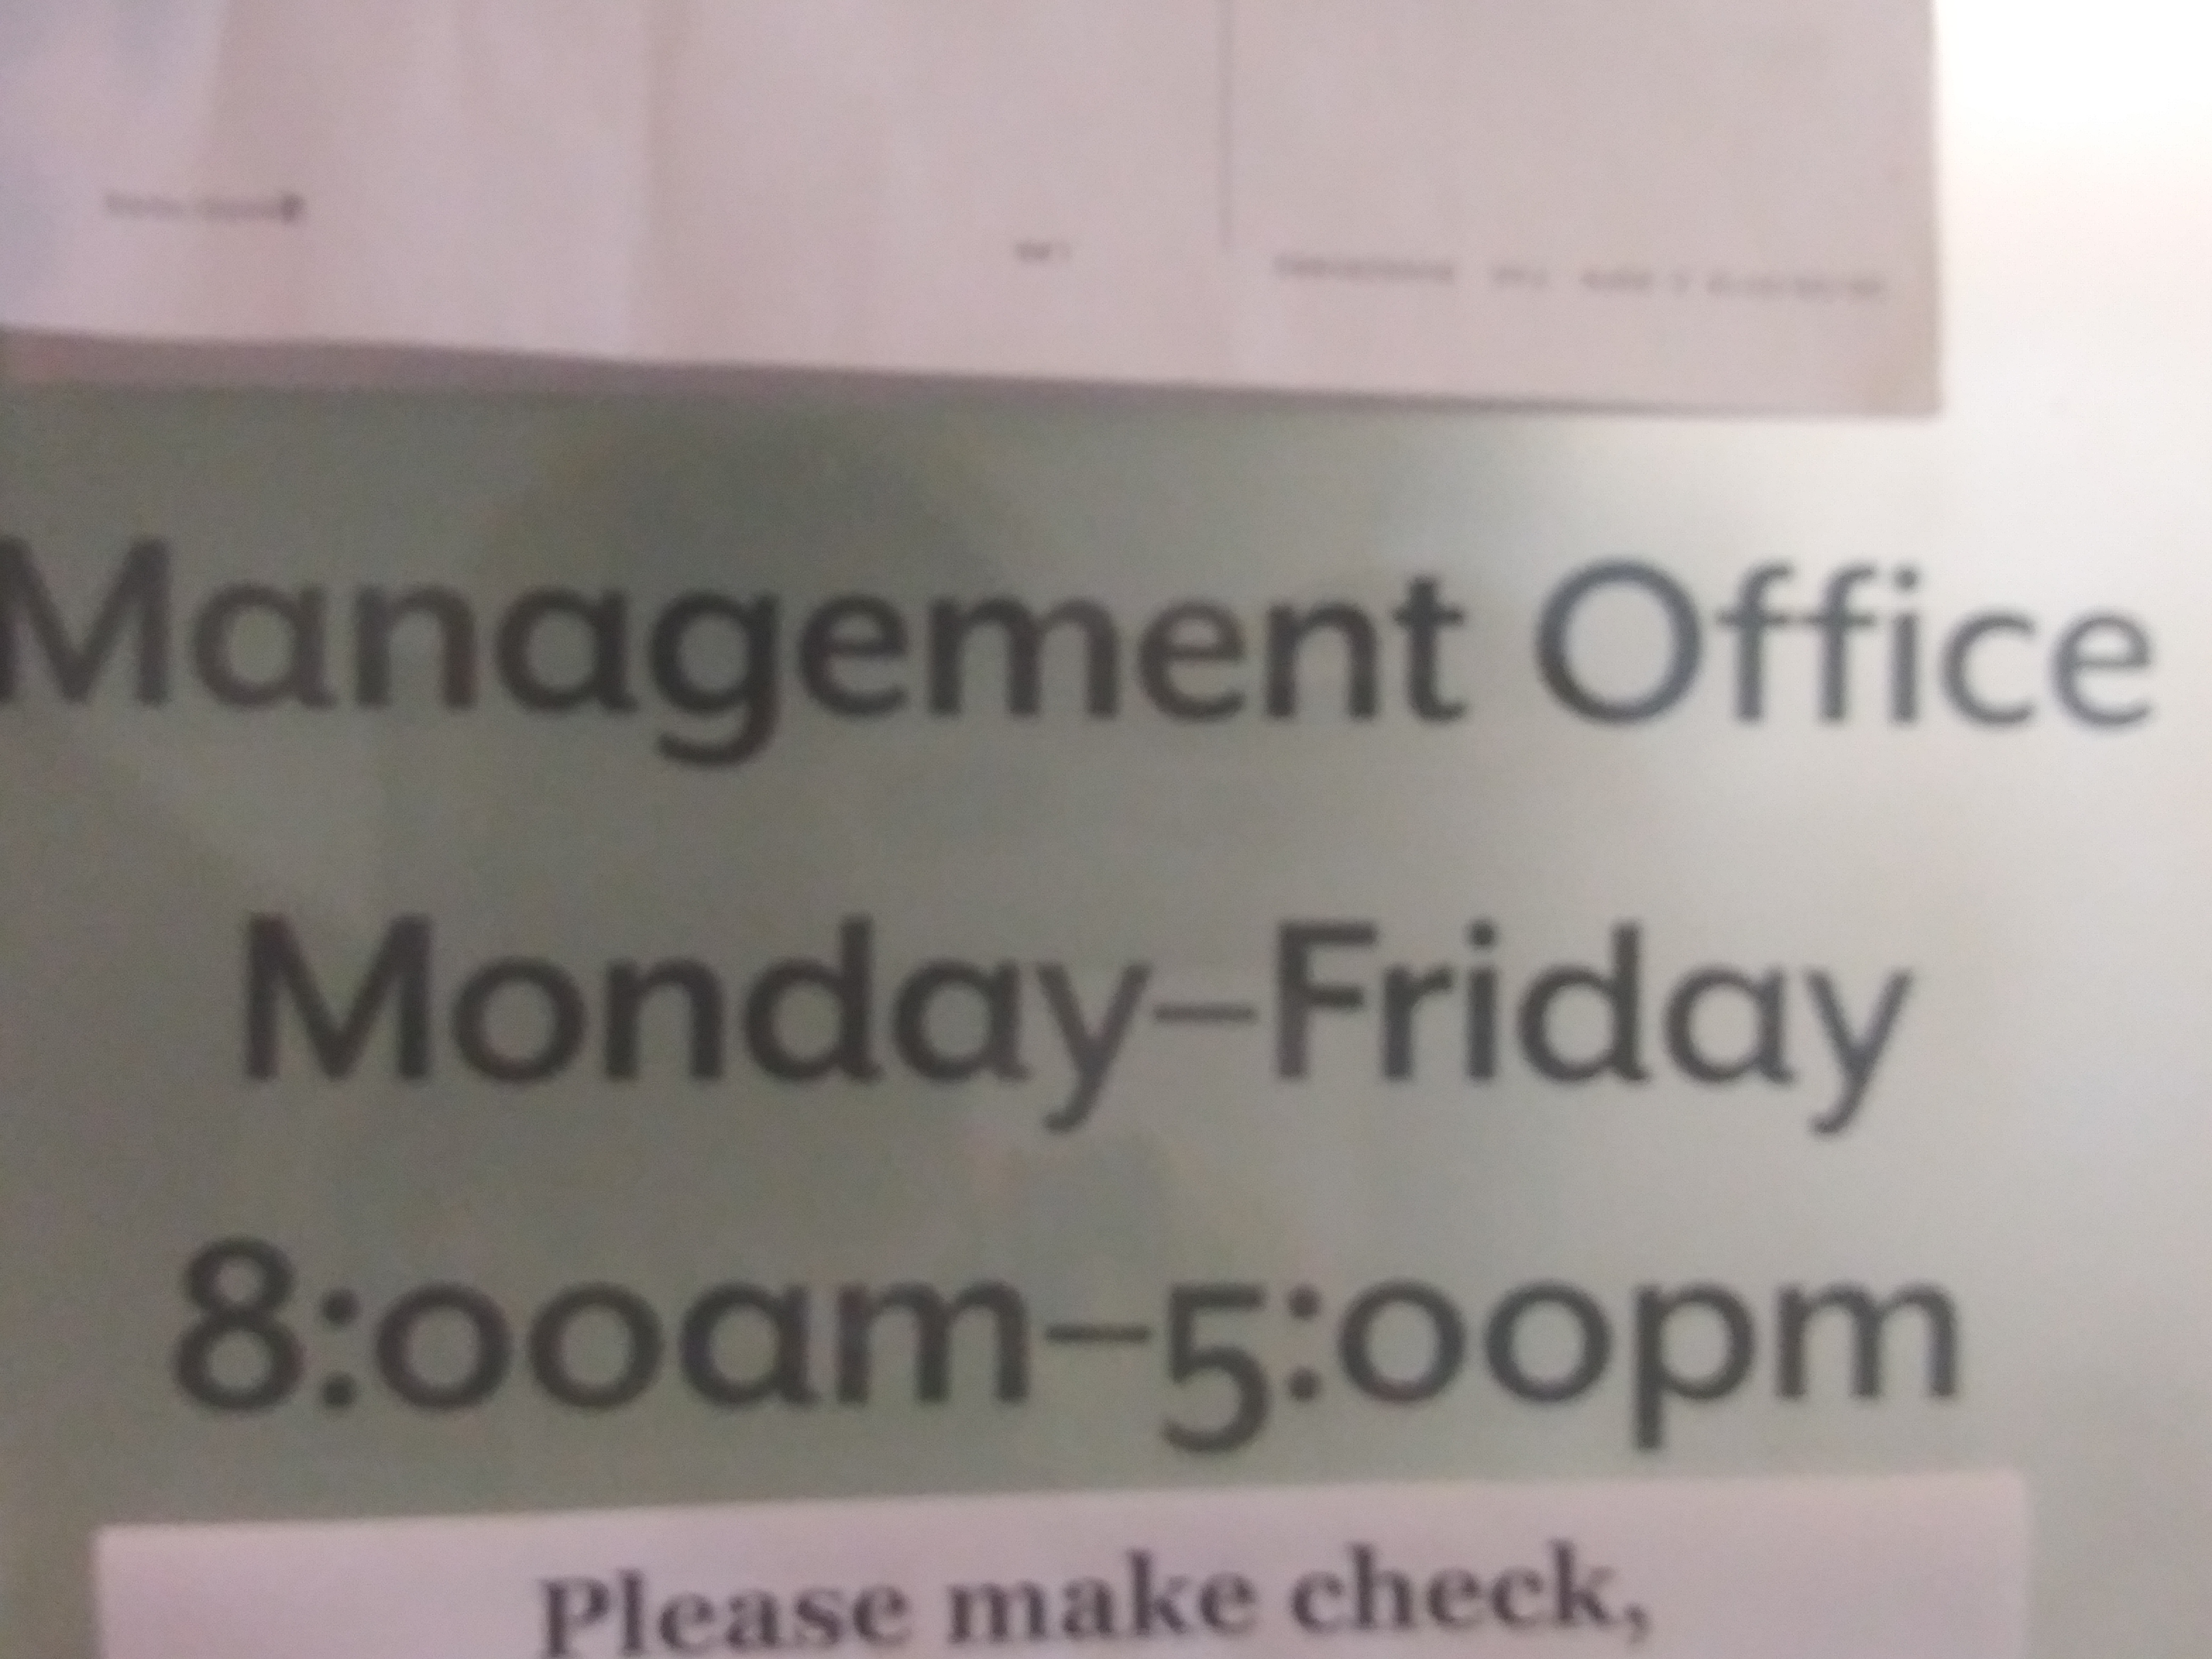 Image of the management office hours